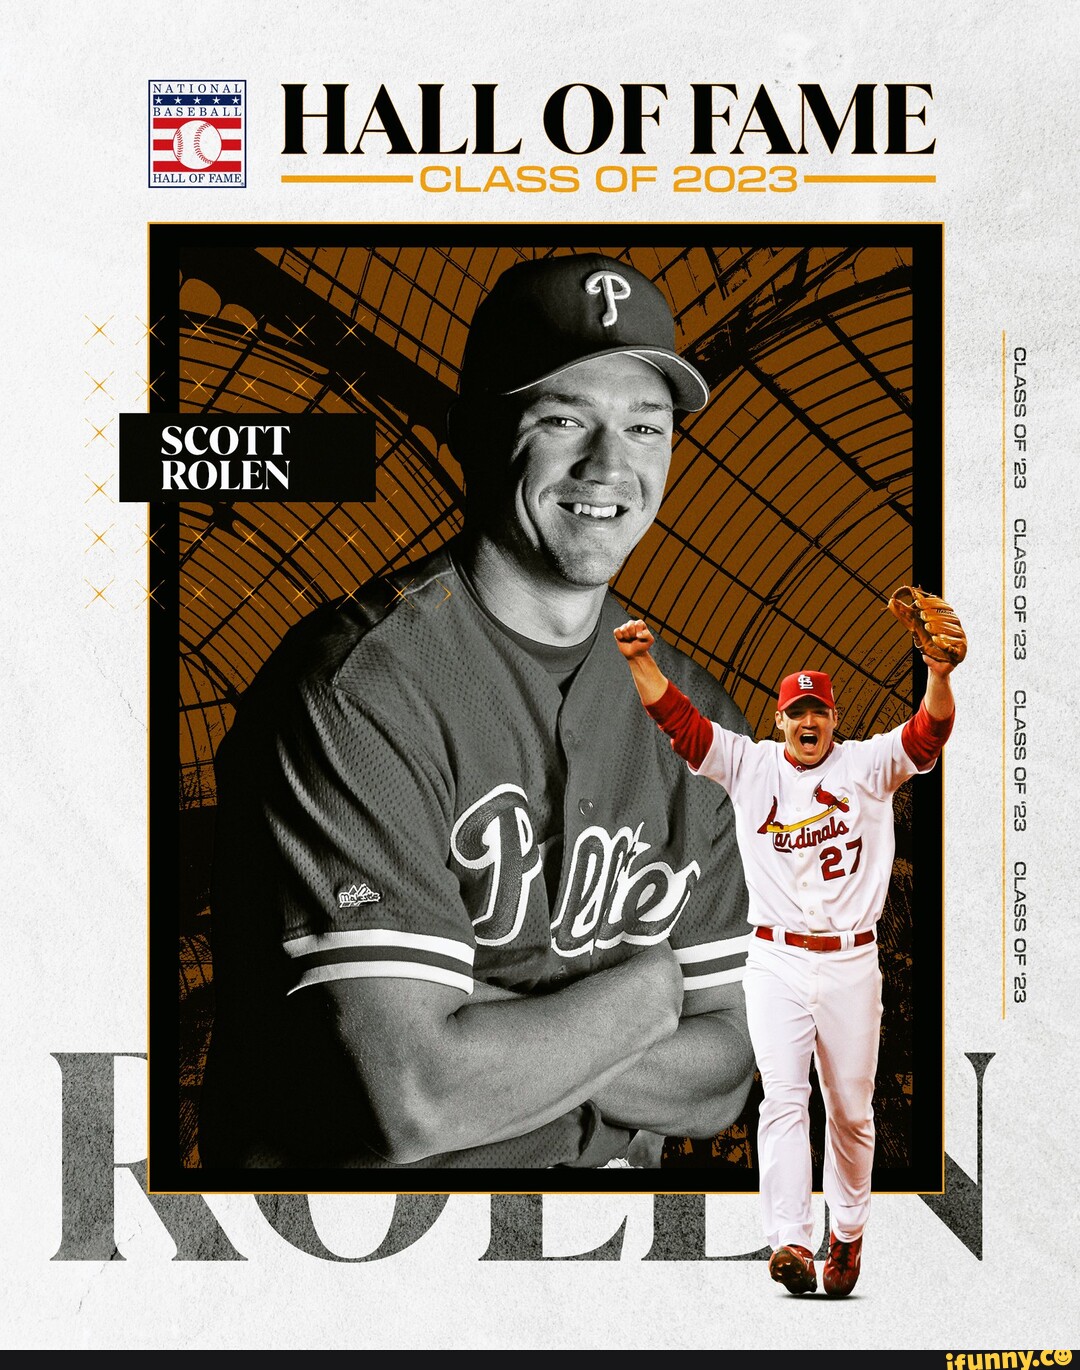 Scott Rolen Pop Fly 2023 Hall of Fame Induction 7 x 10.5 Limited Edition  Art Print